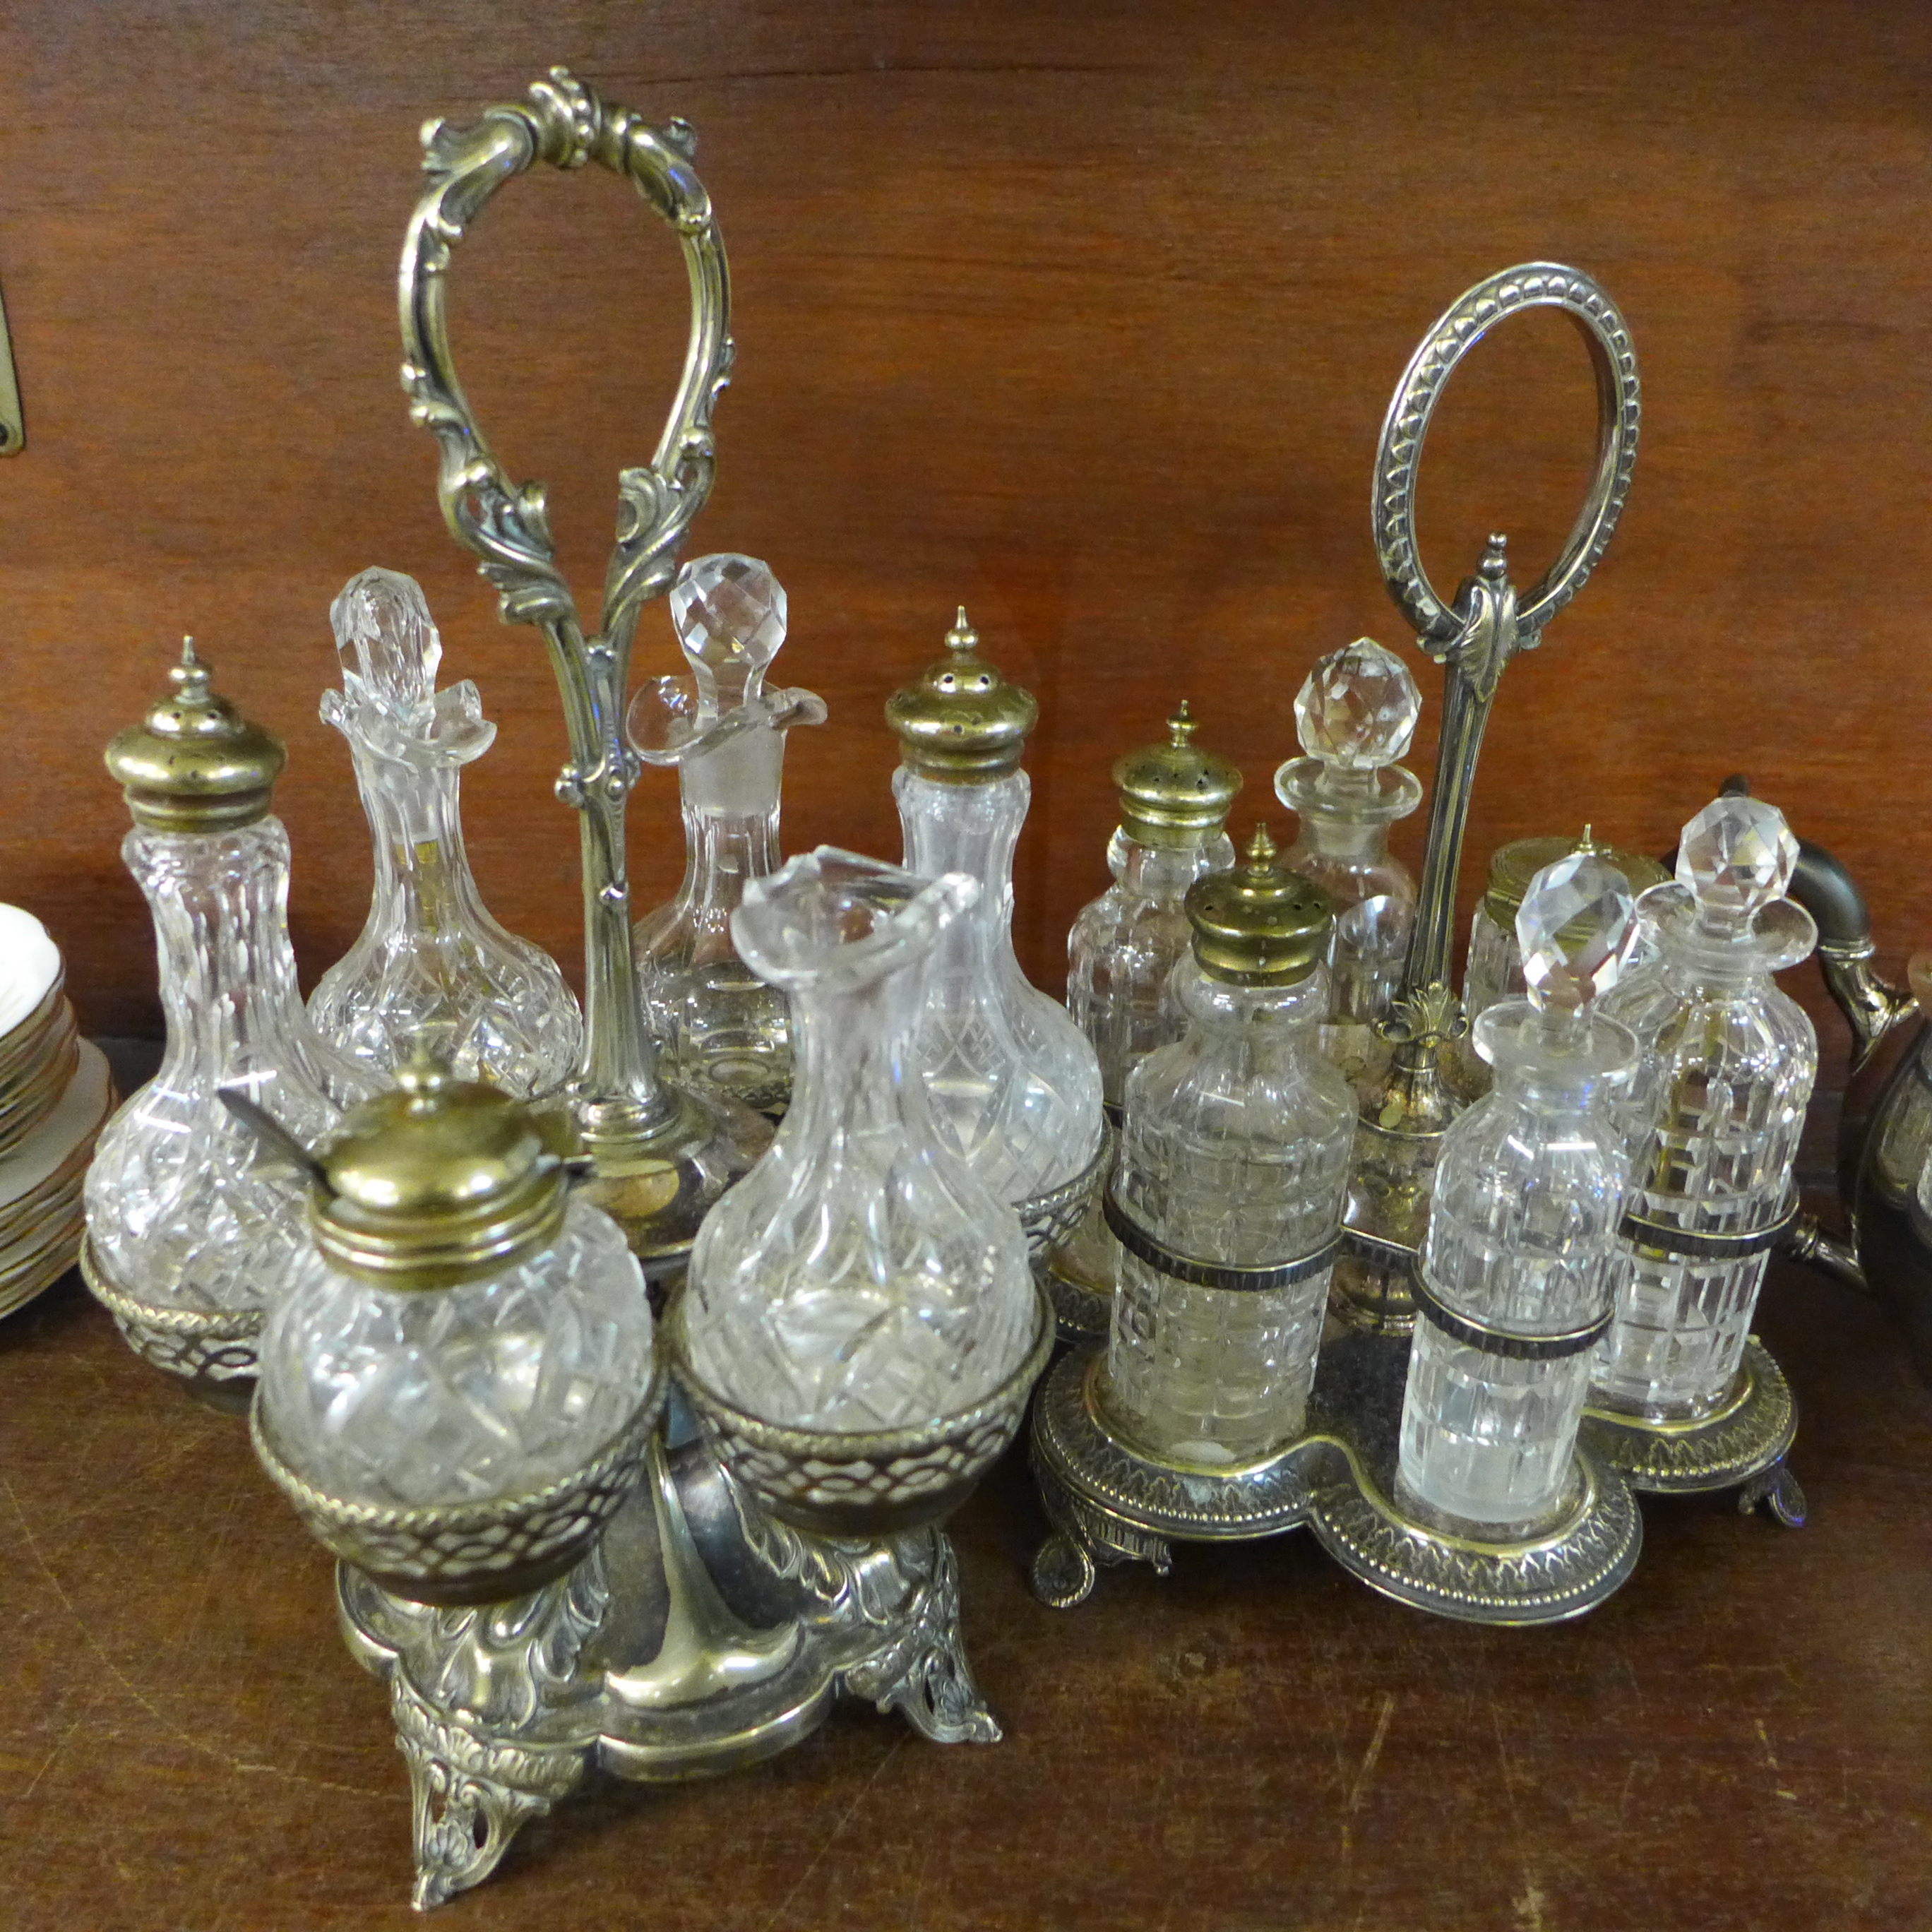 Two six-bottle cruets with plated stands and a silver plated three piece tea service - Image 3 of 3